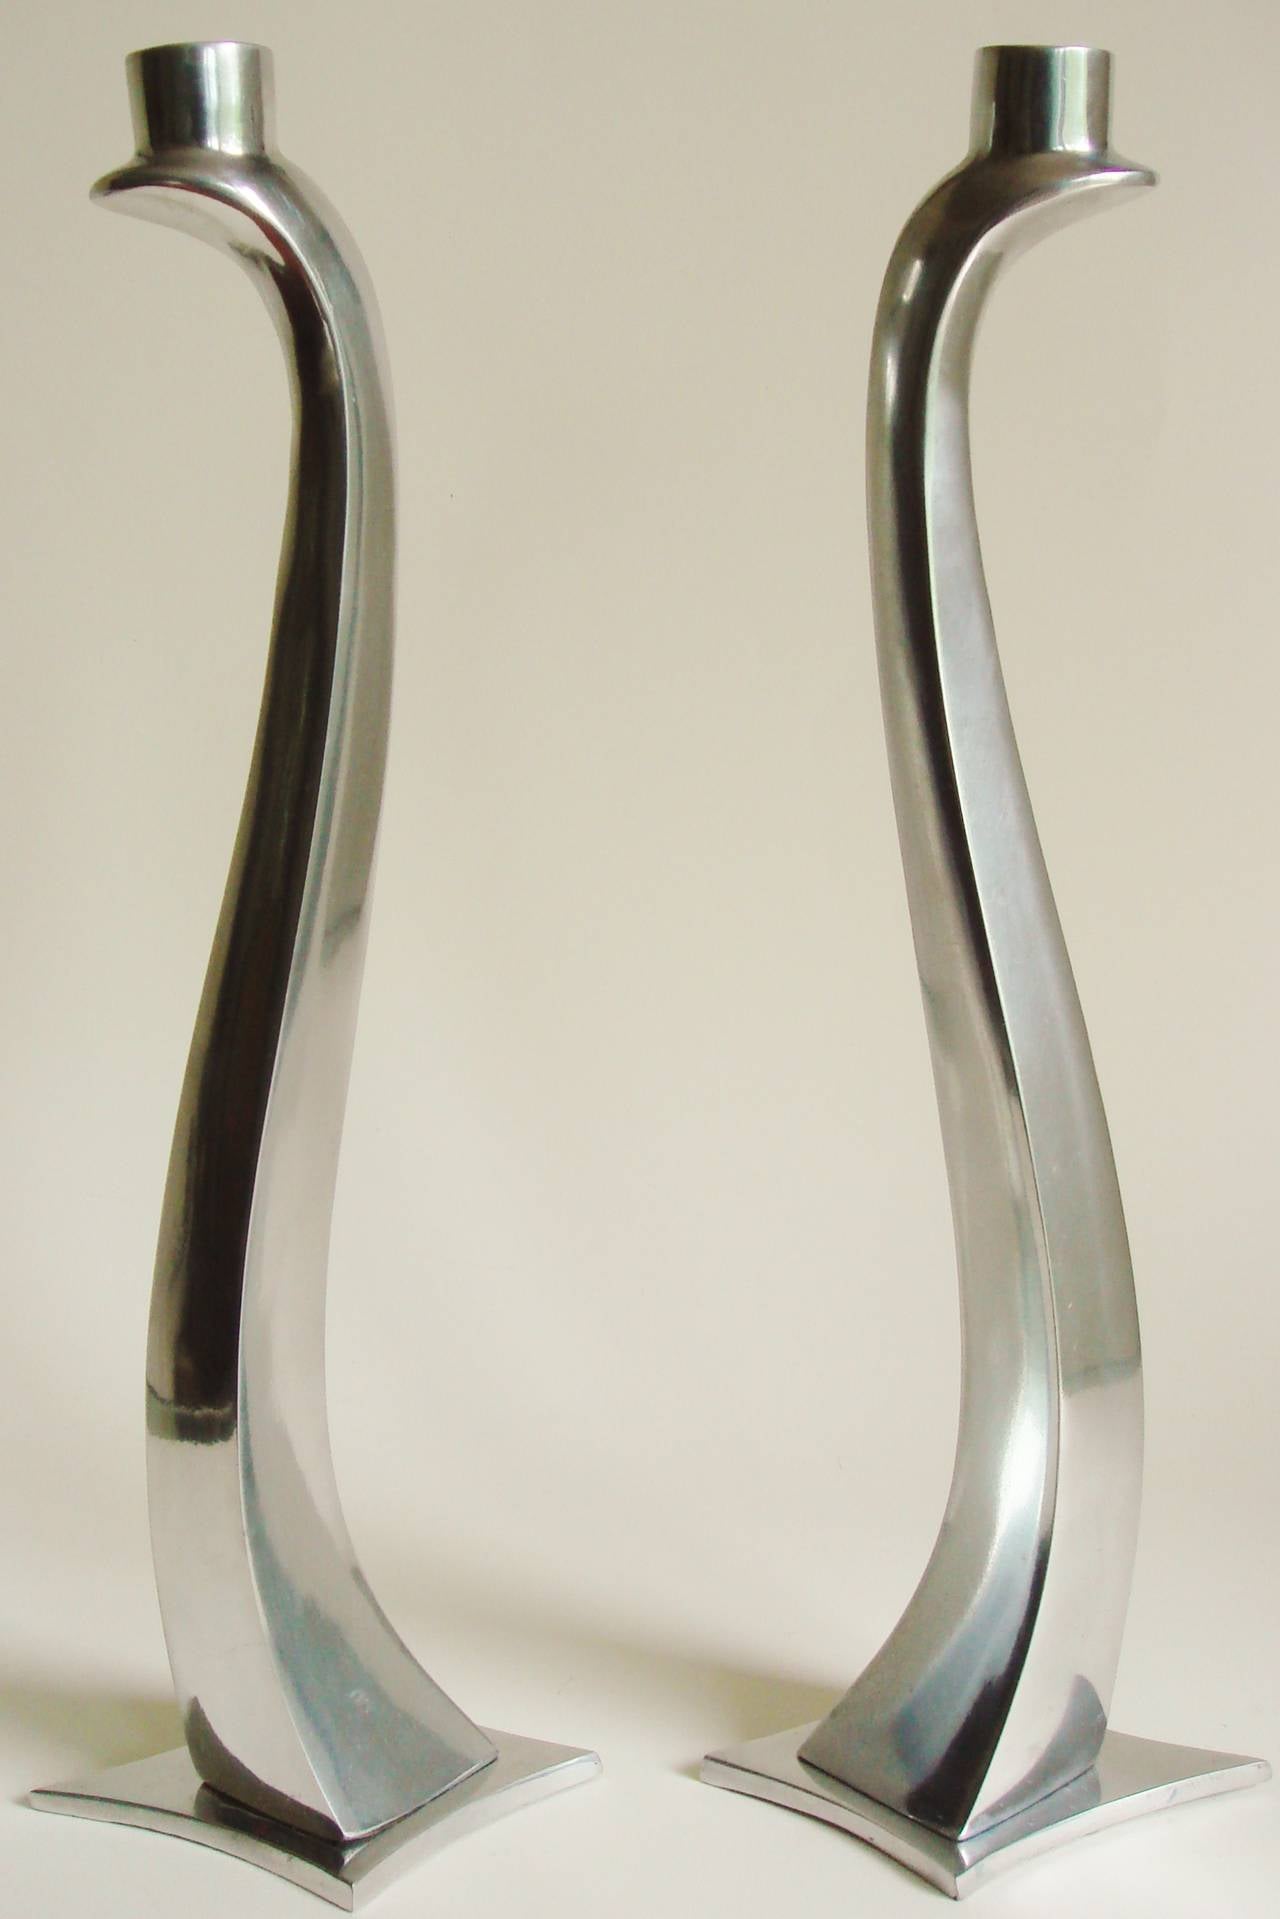 This tall and amusing pair of 80's Modern polished aluminium biomorphic candlesticks are by Escapade Paris are in the form of 